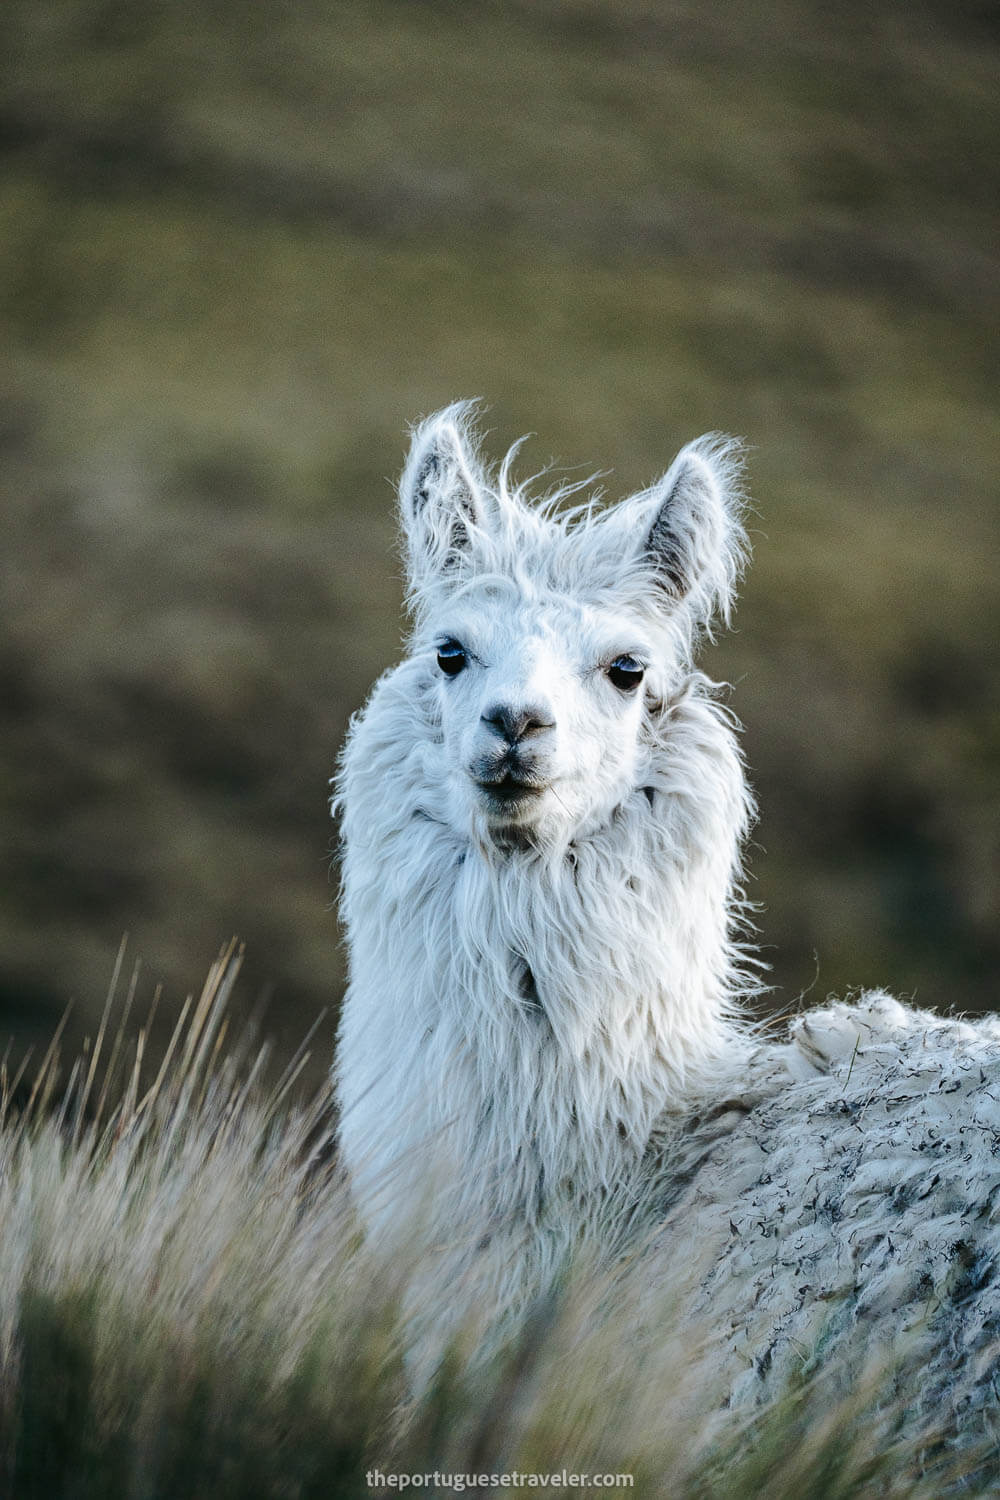 A llama on the reserve